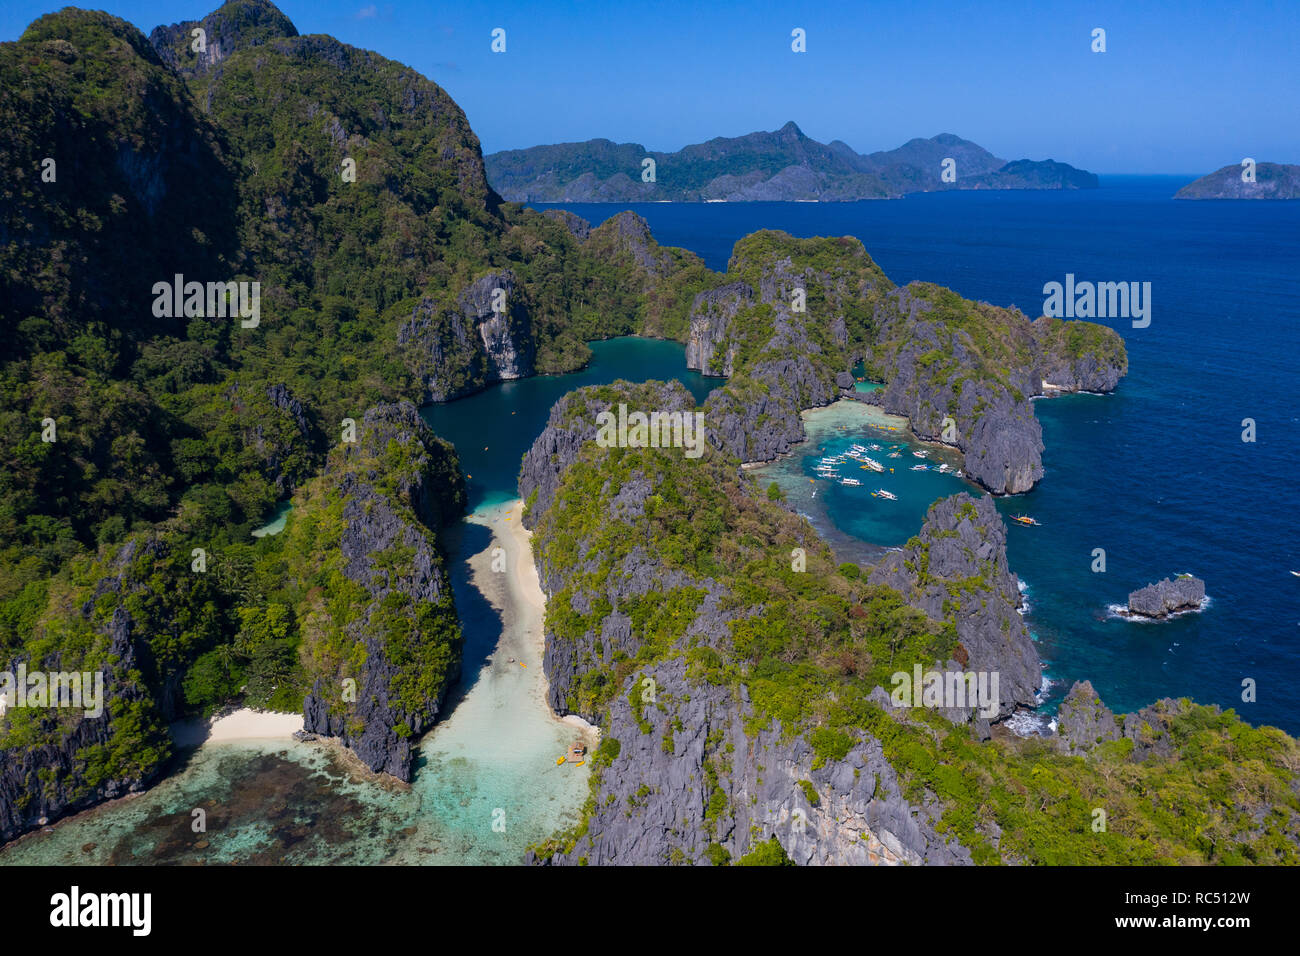 Aerial view of small Lagoon to the right with boats and Big Lagoon on the left,Miniloc Island,El Nido,Palawan,Philippines Stock Photo